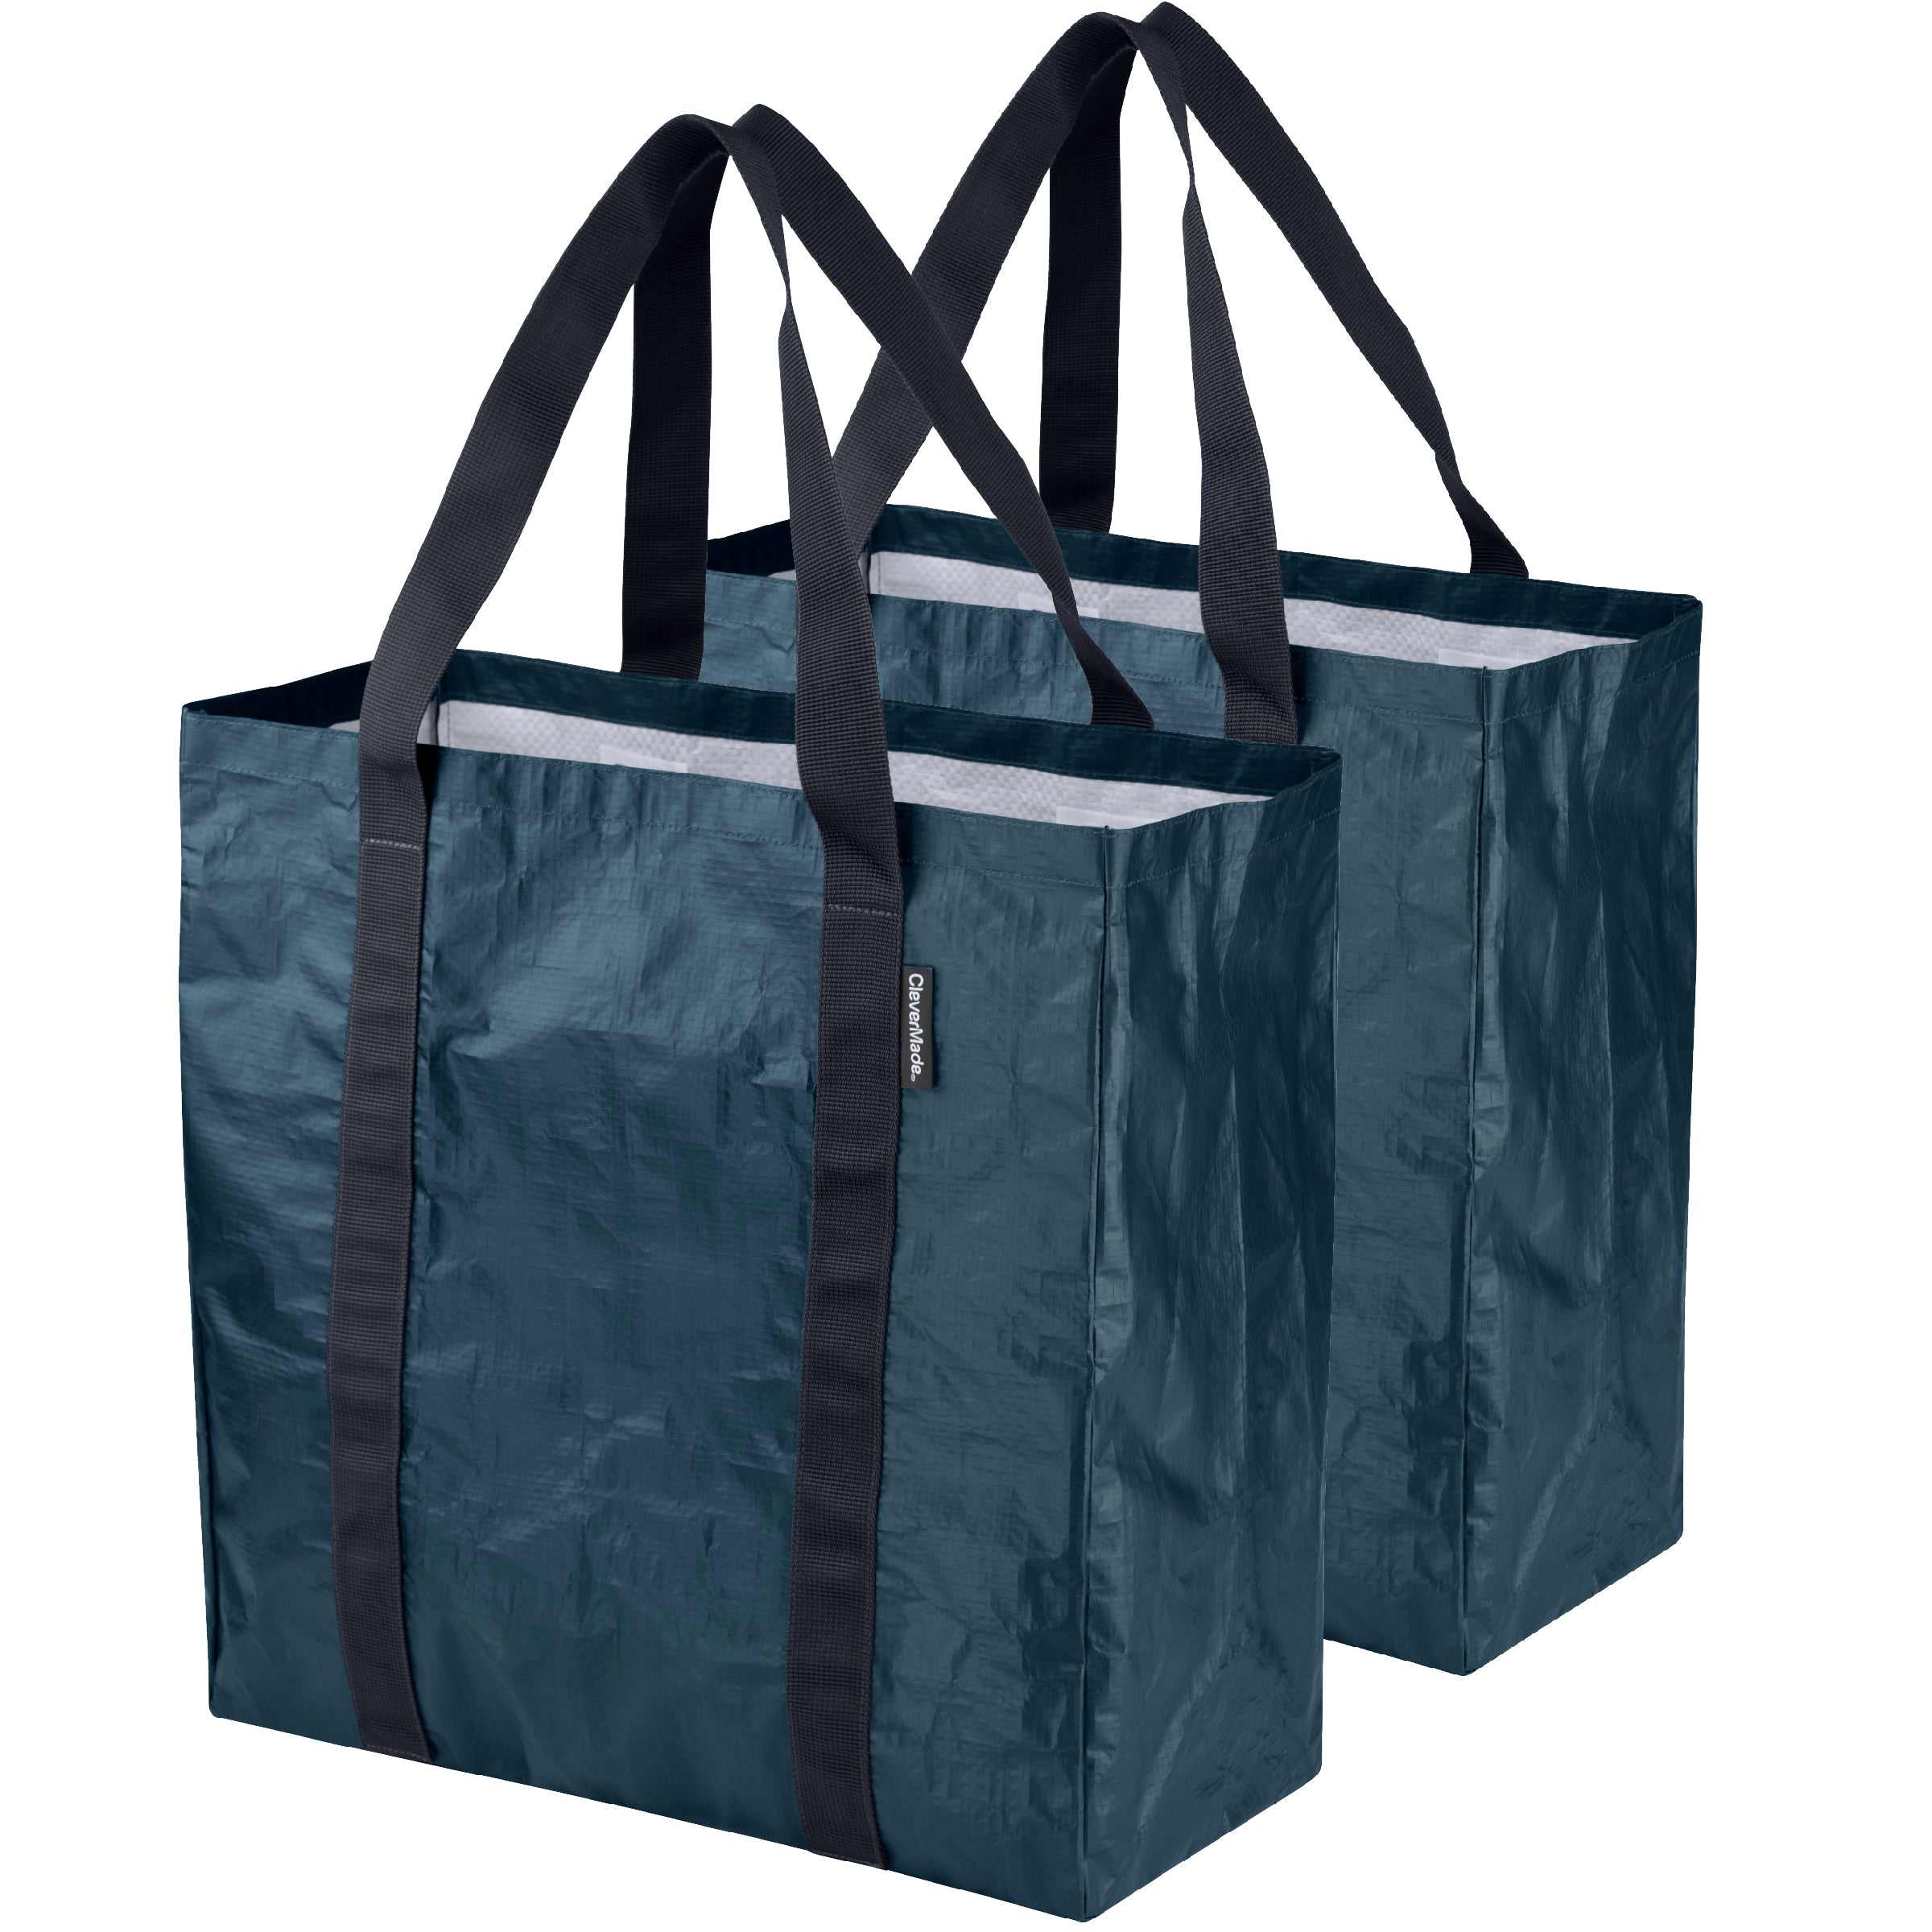  CLEVERFECT Reusable Grocery Box Bags. Large, Durable